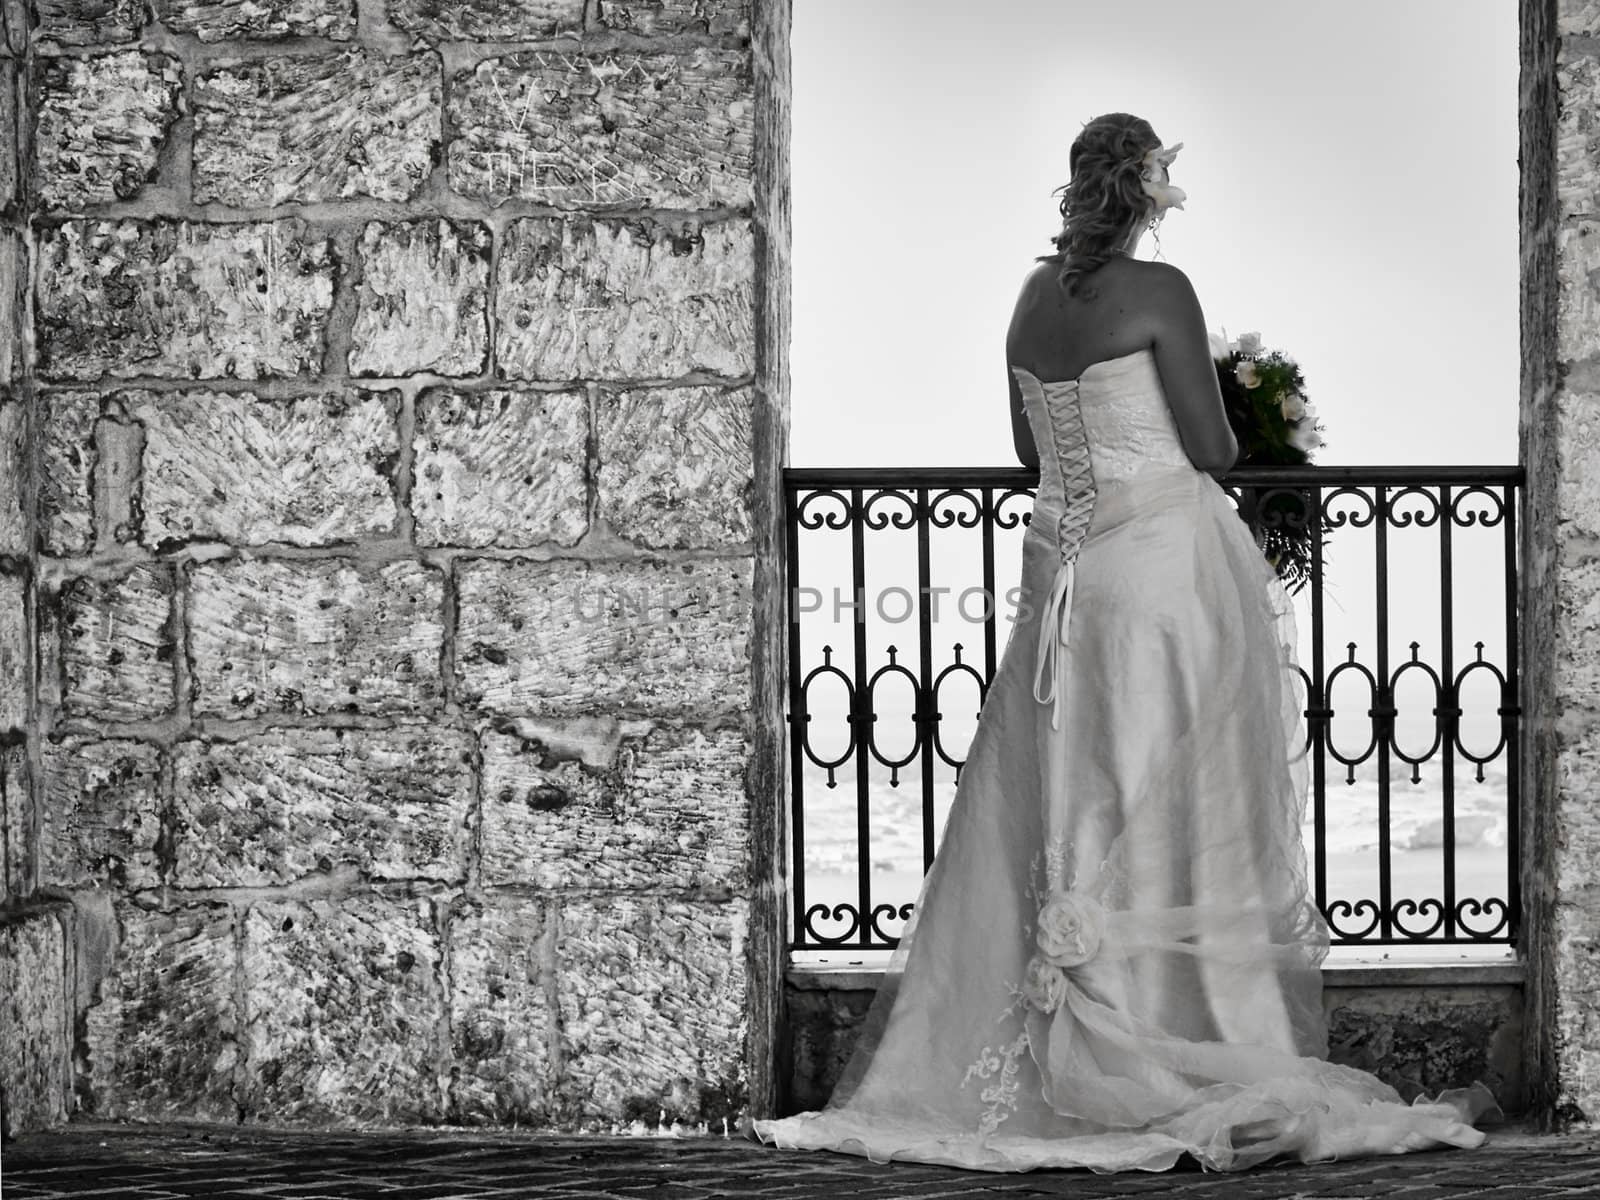 The Bride by PhotoWorks